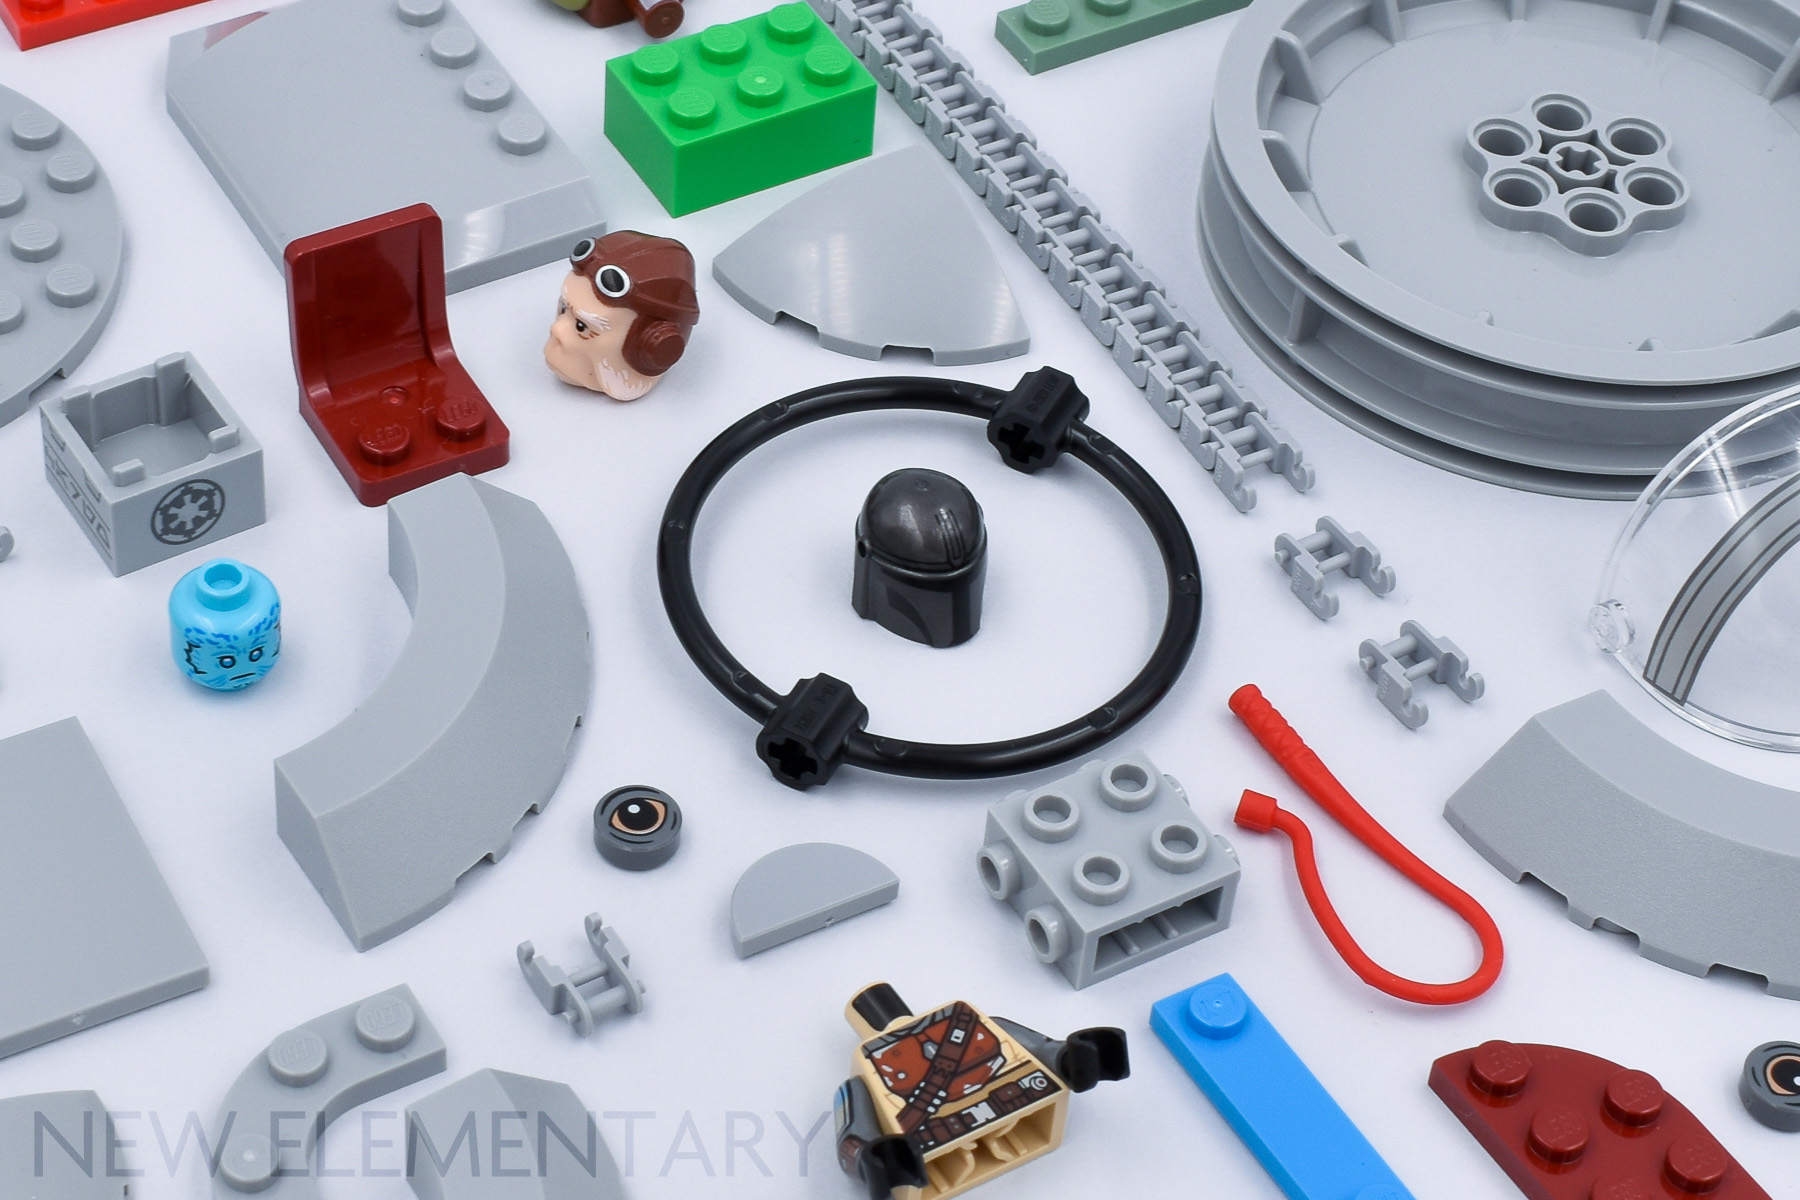 New Elementary: LEGO® parts, sets and techniques: September 2022